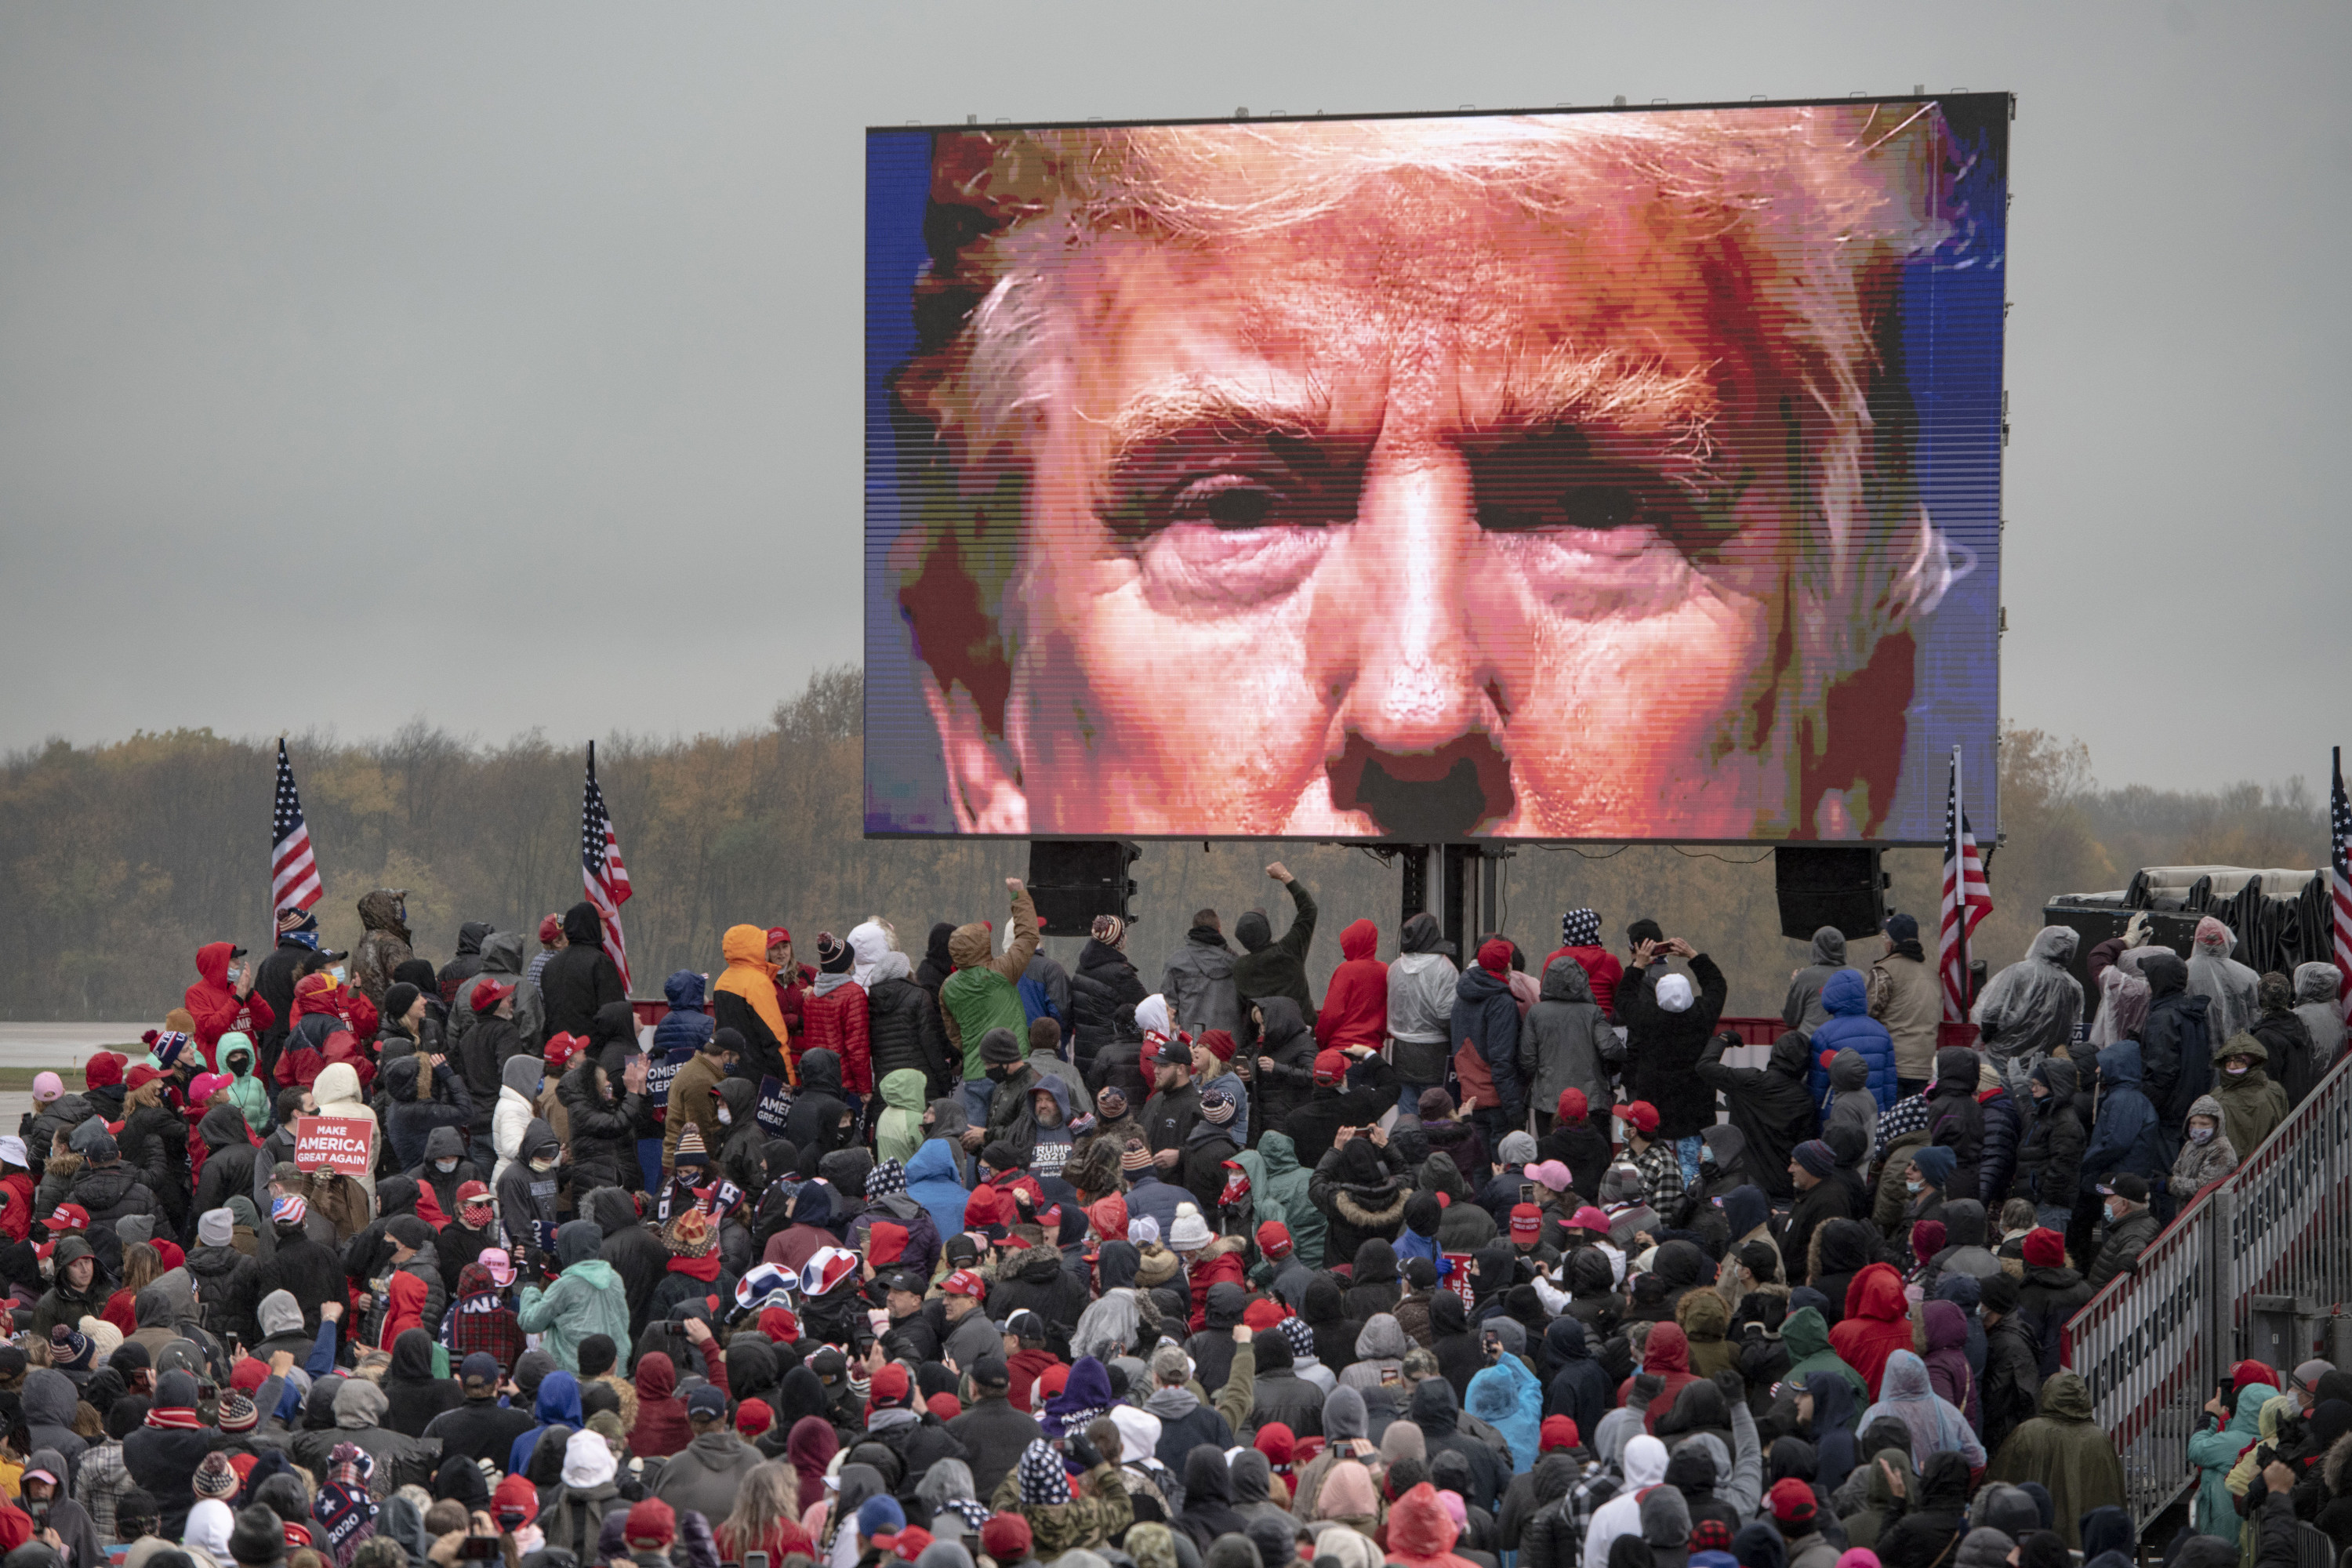 Trump supporters watch a video during a campaign event in Lansing, Michigan, in October 2020. Photo: Ann Arbor News via AP